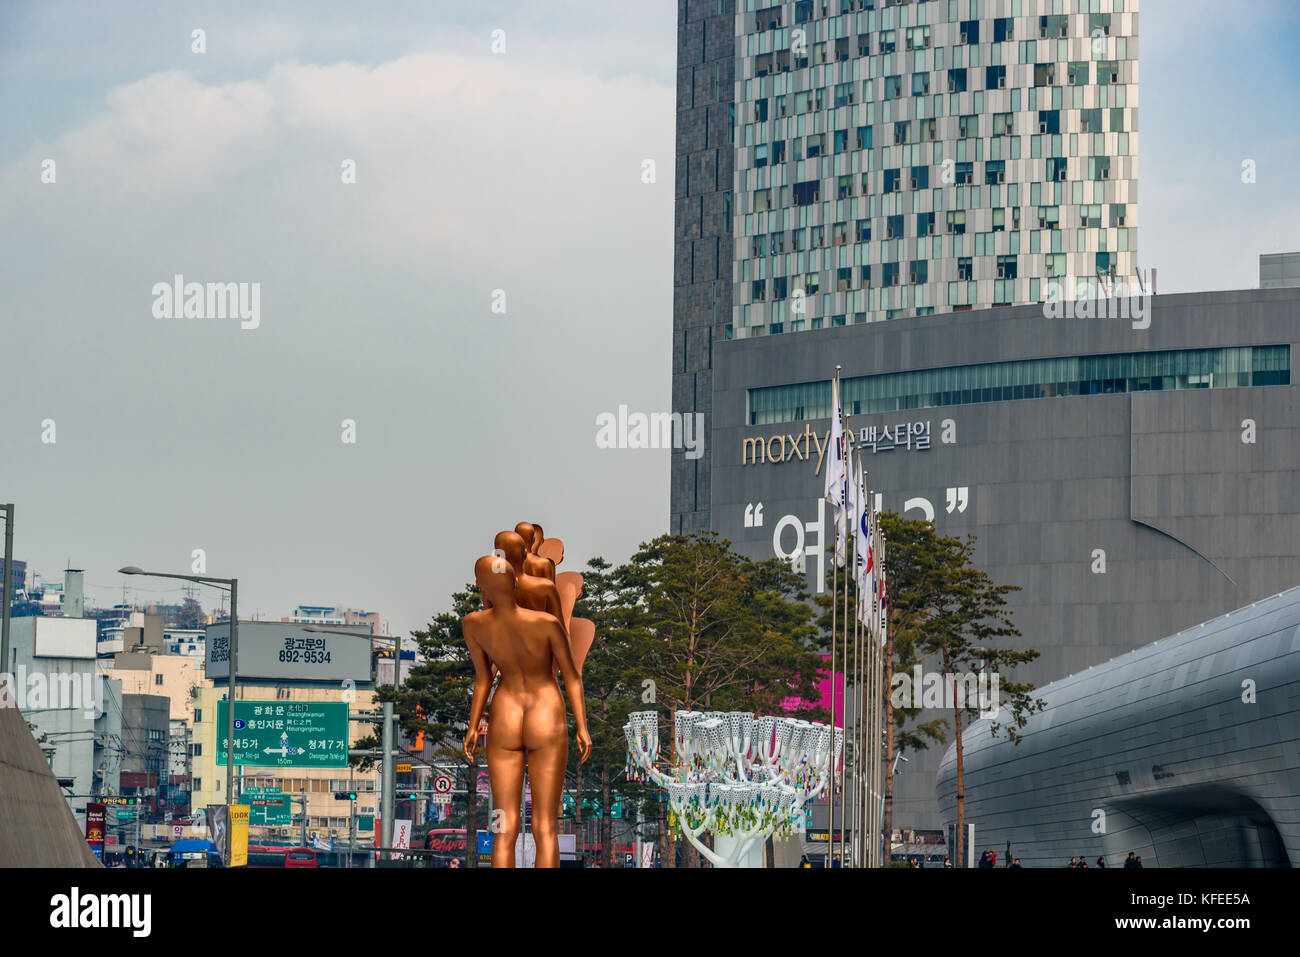 SEOUL, SOUTH KOREA - DECEMBER 31, 2016 - View of Dongdaemun Design Plaza in Seoul with a sculpture of a woman. Stock Photo